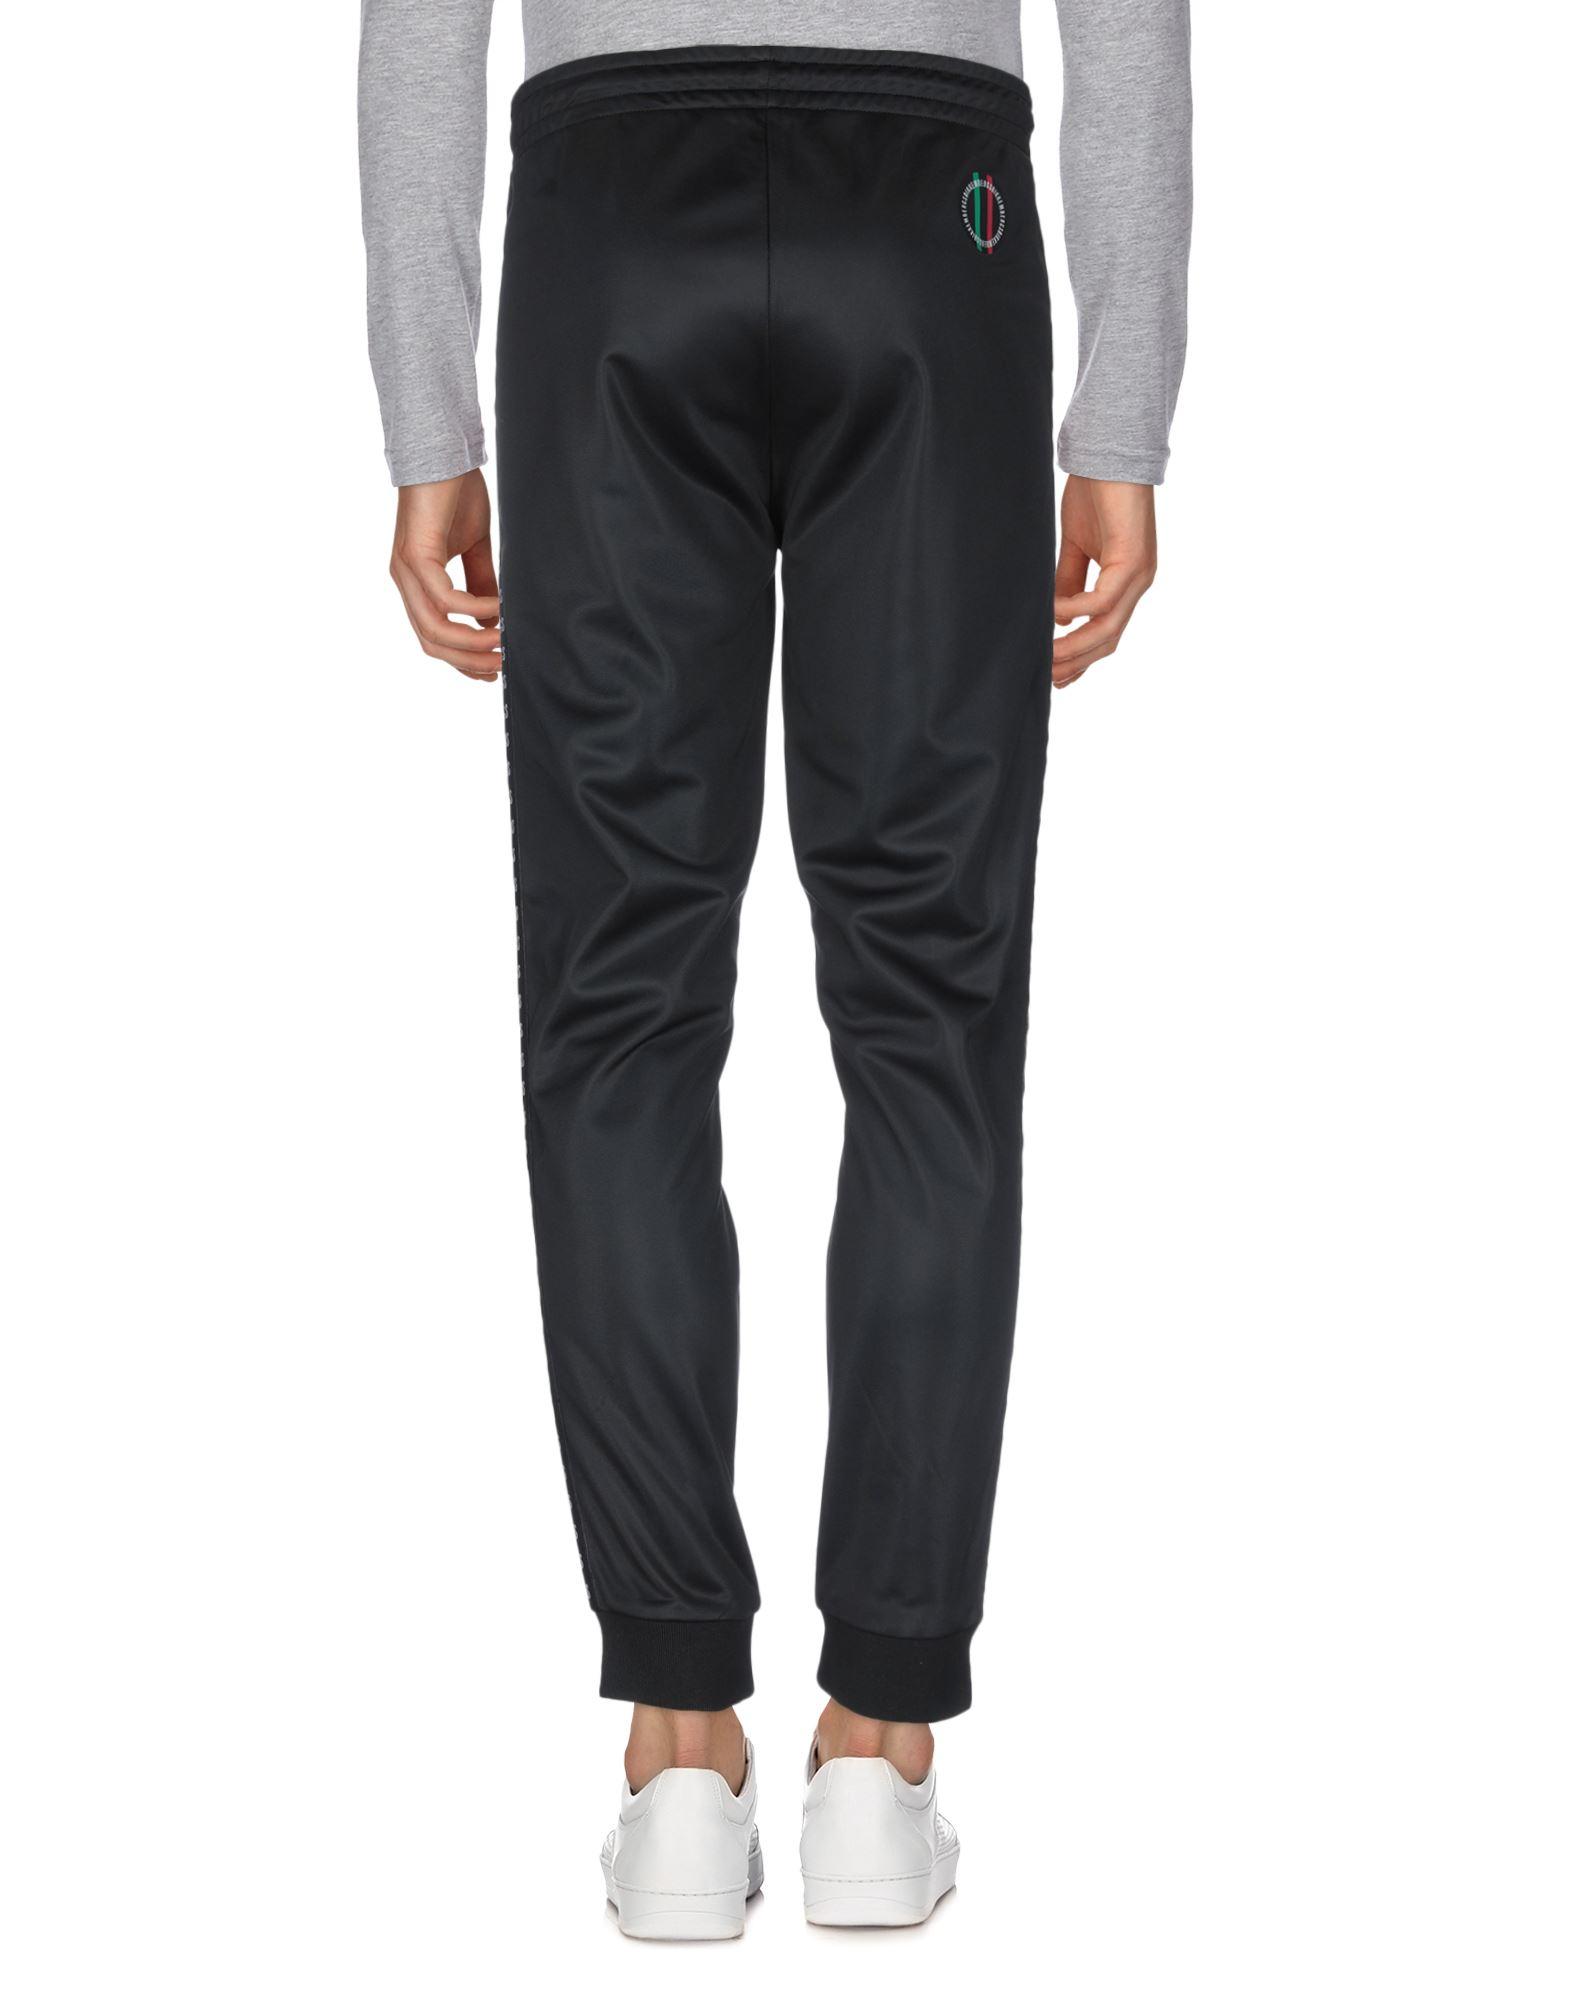 Bikkembergs Synthetic Casual Pants in Black for Men - Lyst